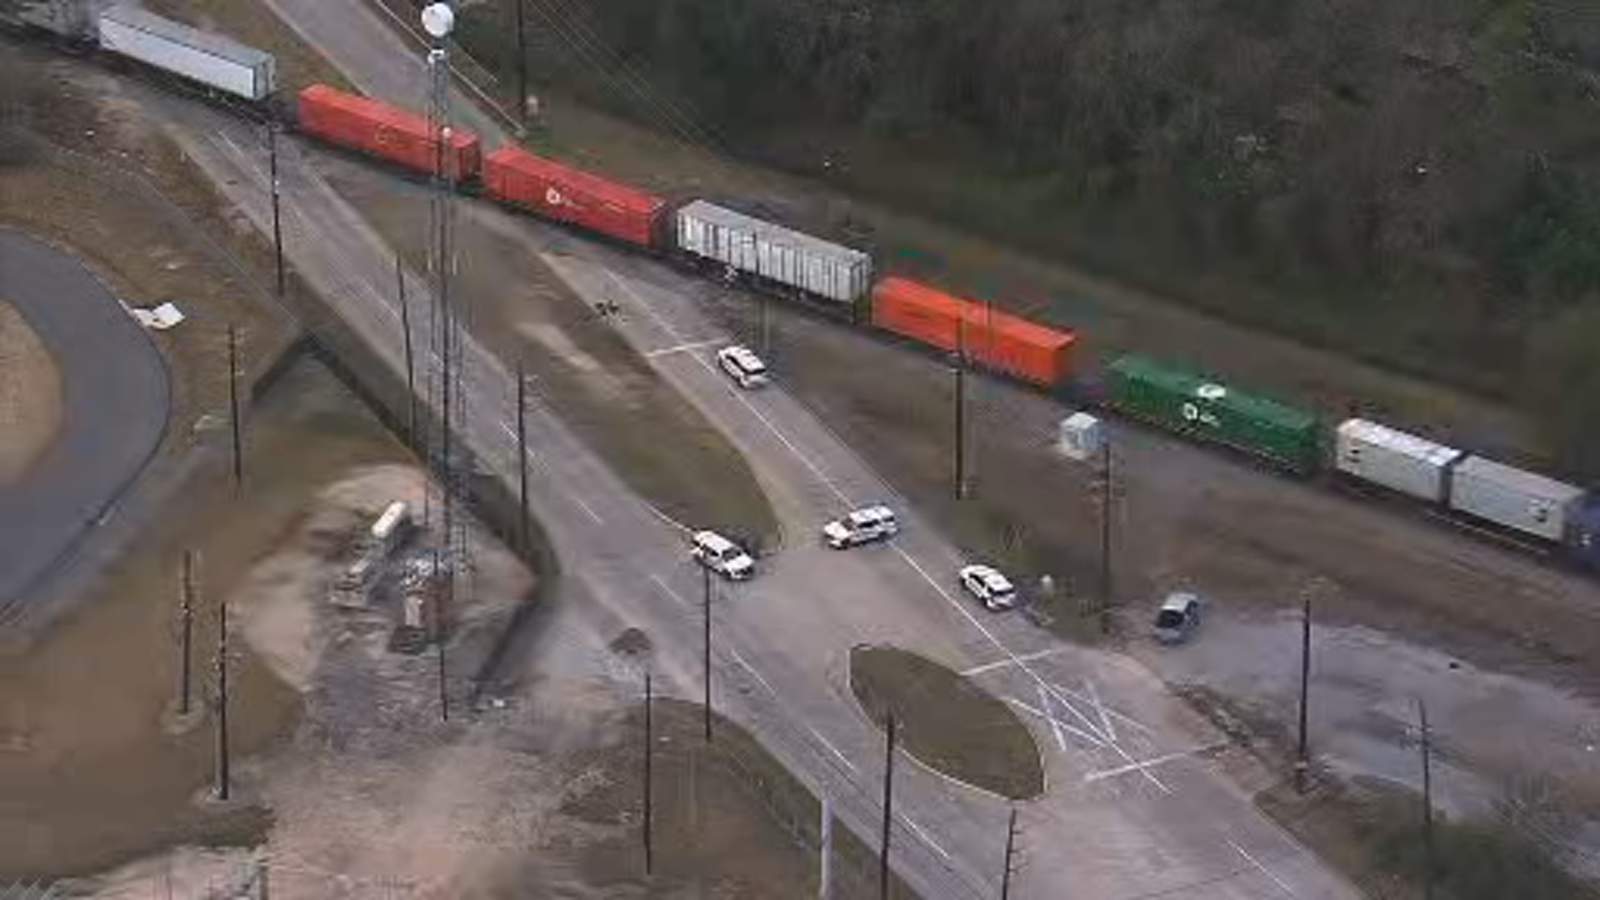 Montgomery County Sheriff’s Office investigating after pedestrian hit by train, deputies say